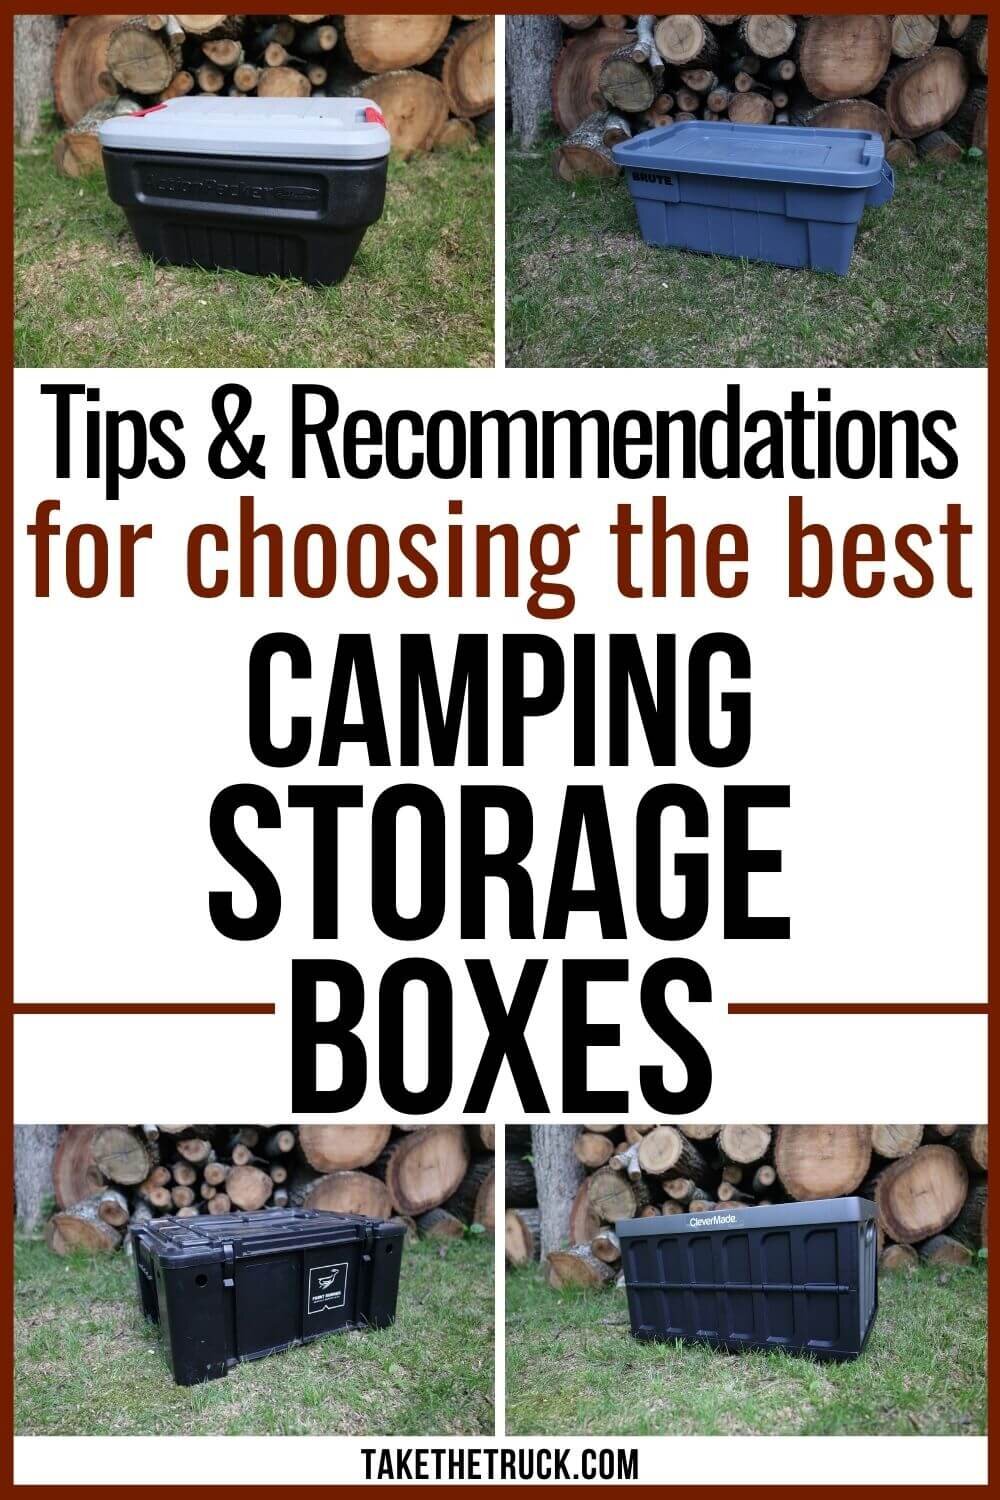 The best storage bins for camping, camping storage box ideas, and storage containers for camping. Many storage boxes for camping - overland storage, truck camper storage, car camping storage.